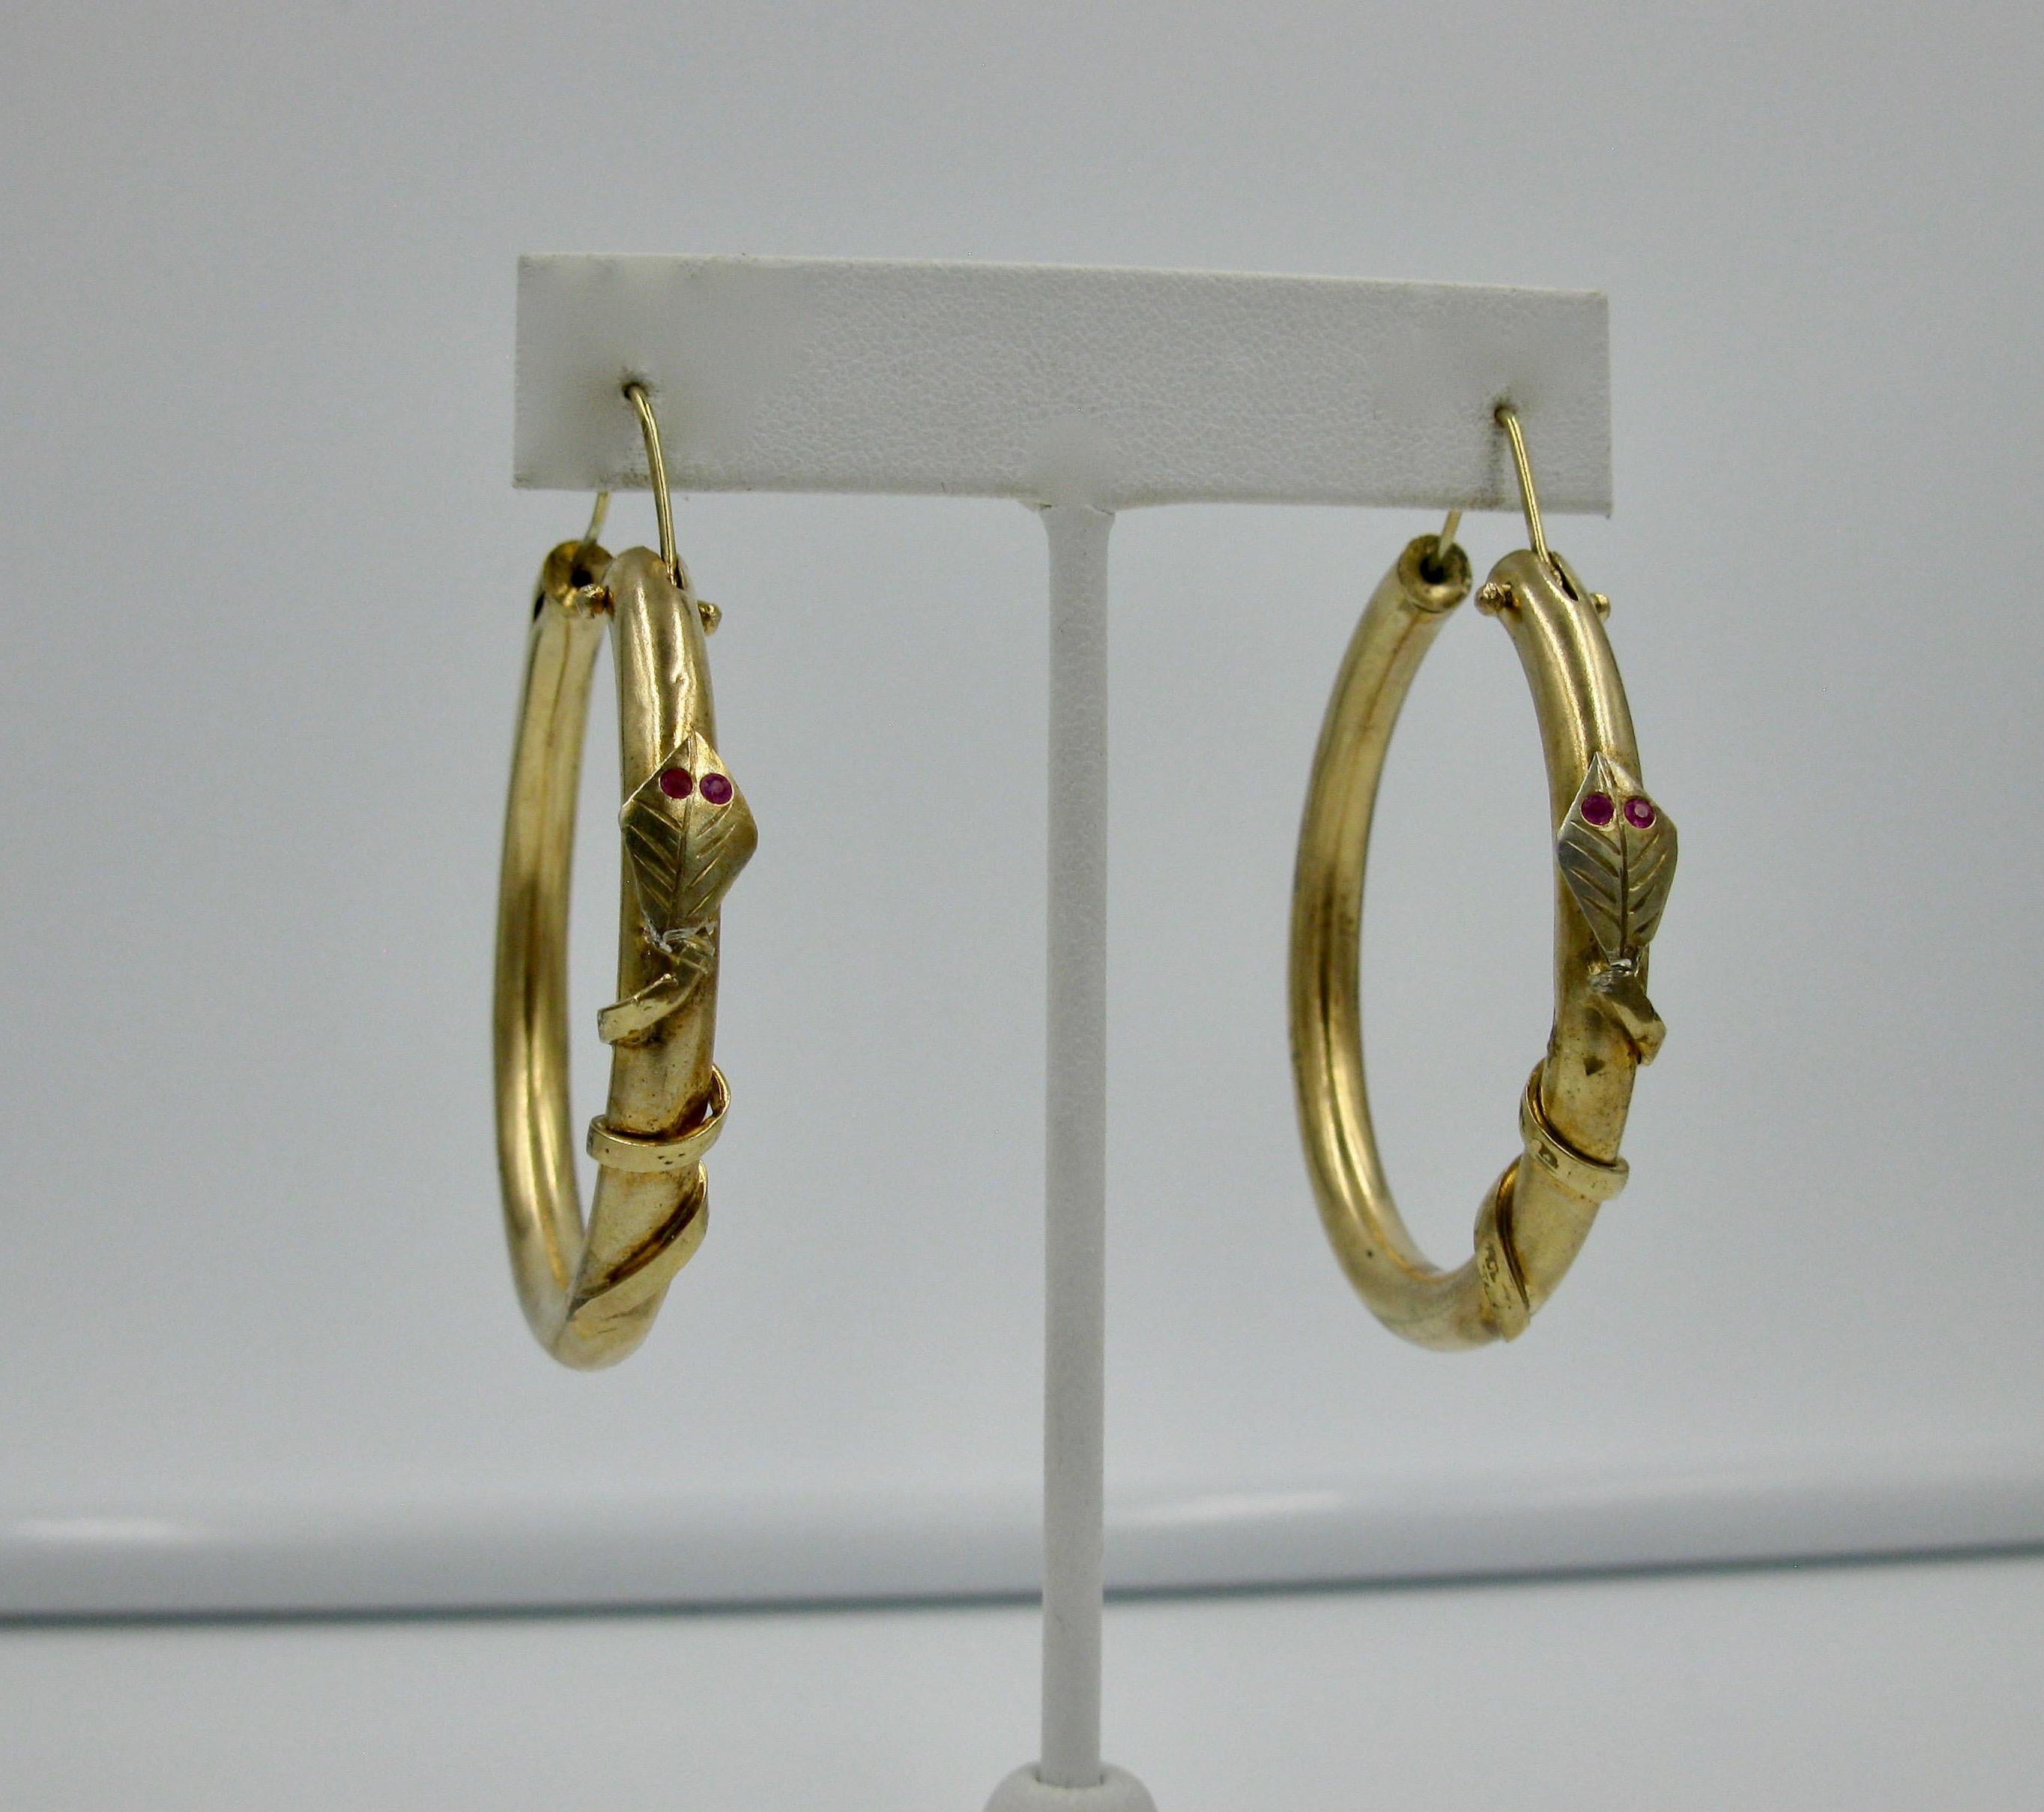 A rare pair of Snake Earrings - museum quality Etruscan Revival Victorian Hoop Earrings with entwined snakes with Ruby eyes.  The earrings of Italian Tuscany origin, probably Florentine, in 12 Karat gold, as the early Italian jewels were, with round